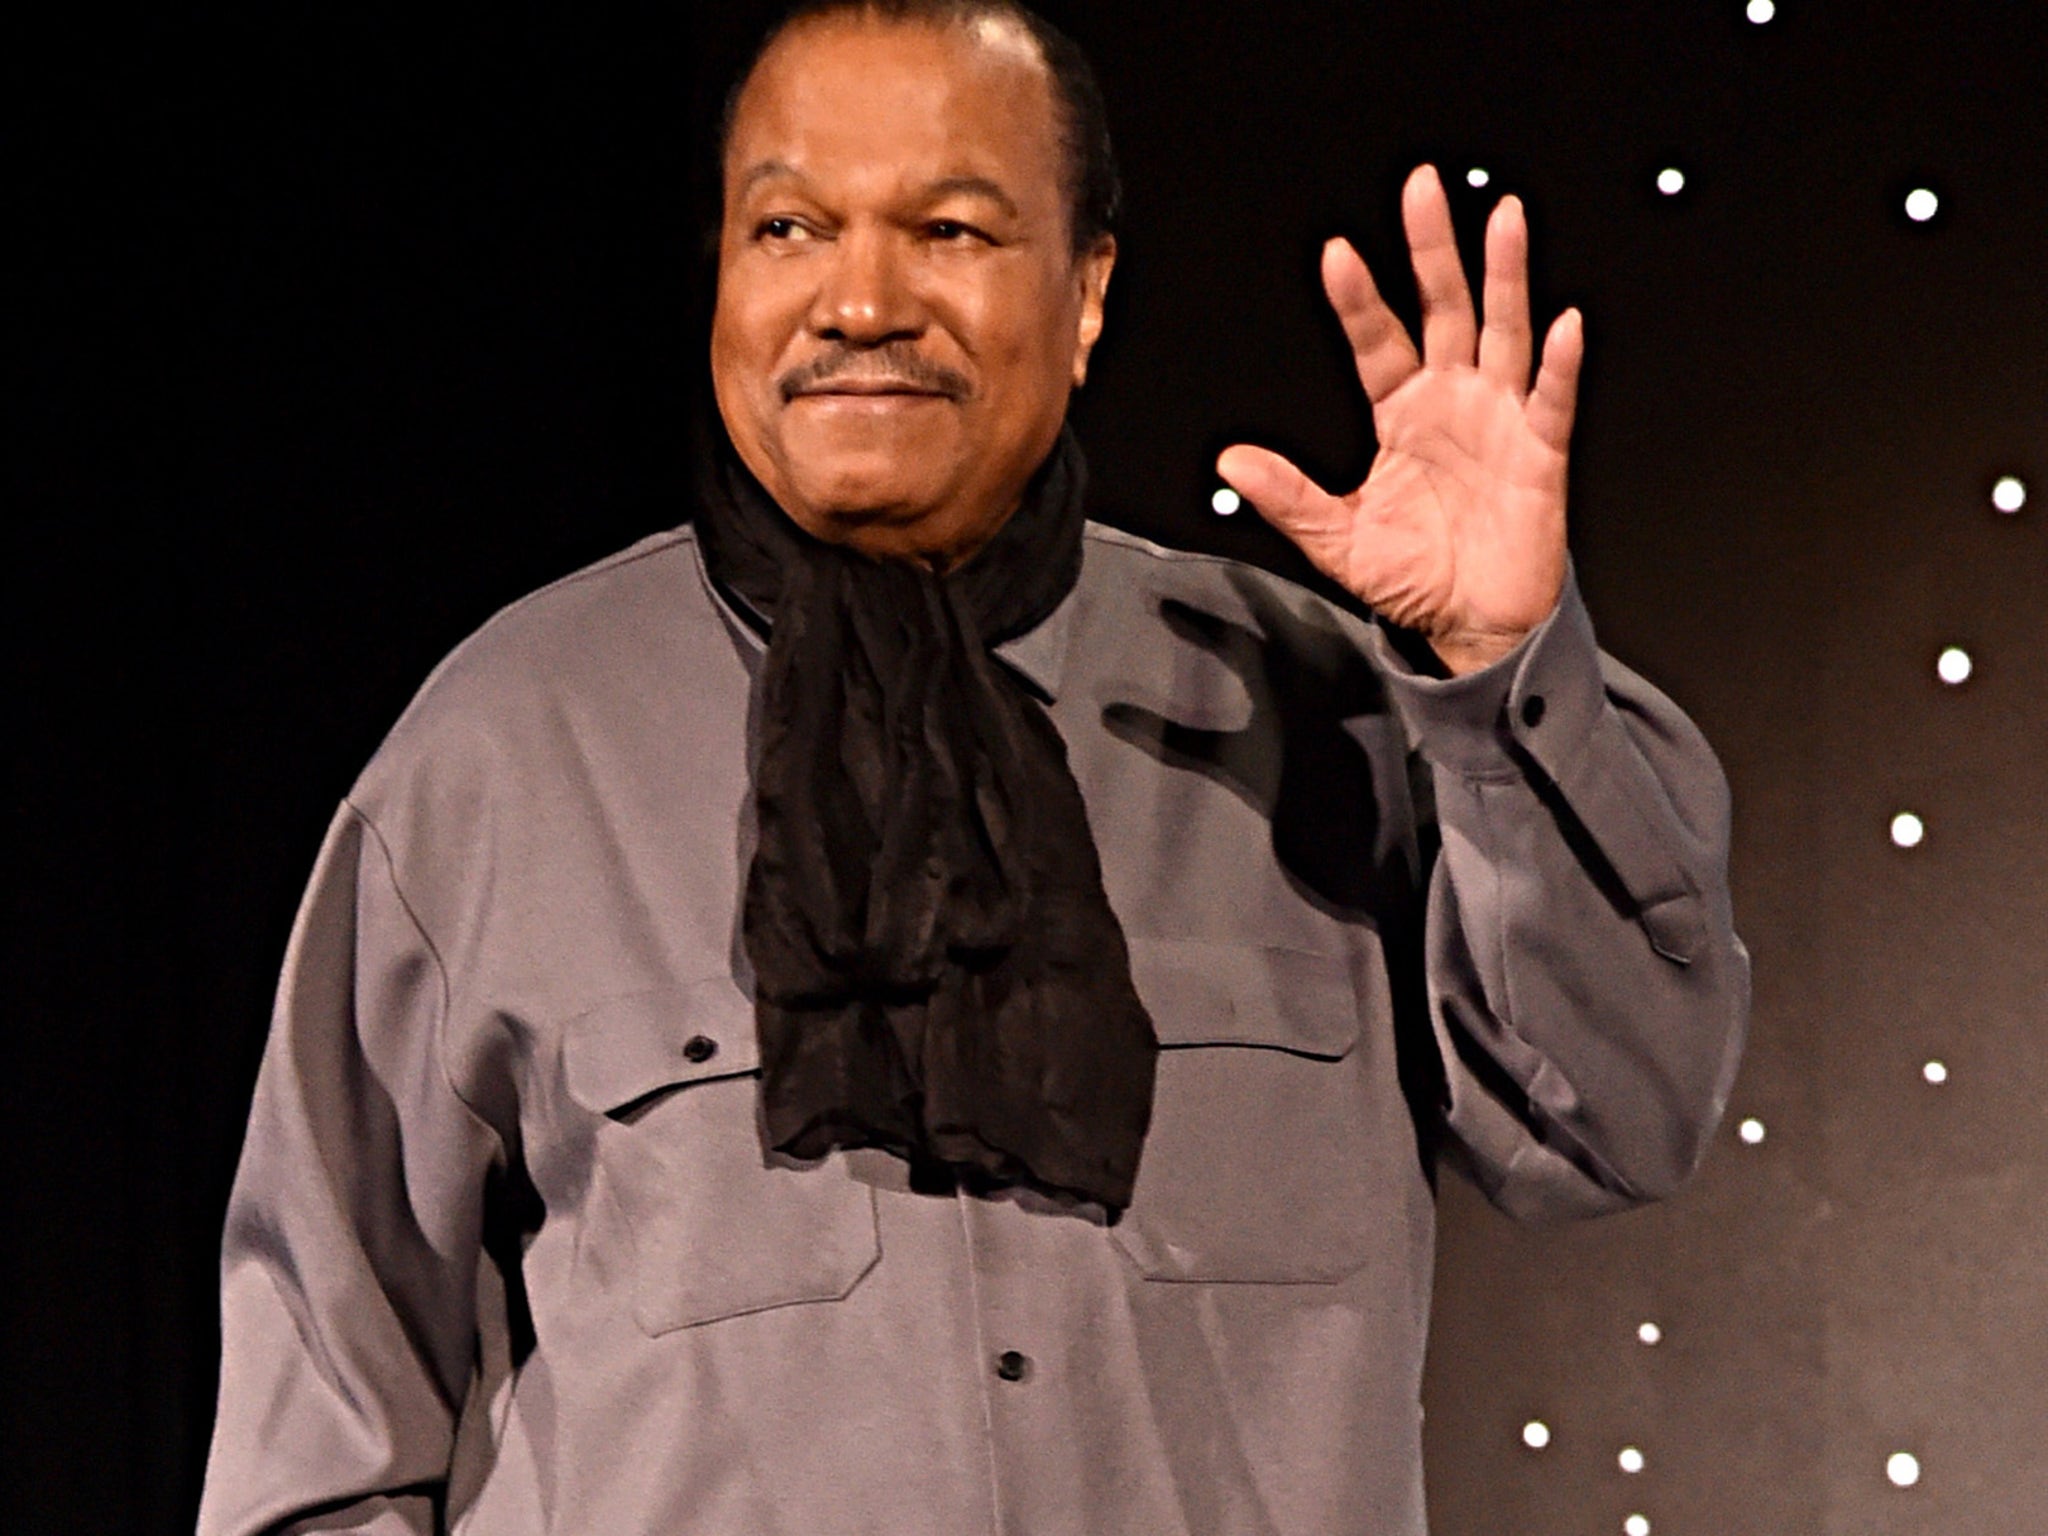 Billy Dee Williams Says Pronoun Use Did Not Mean 'Gender-Fluid